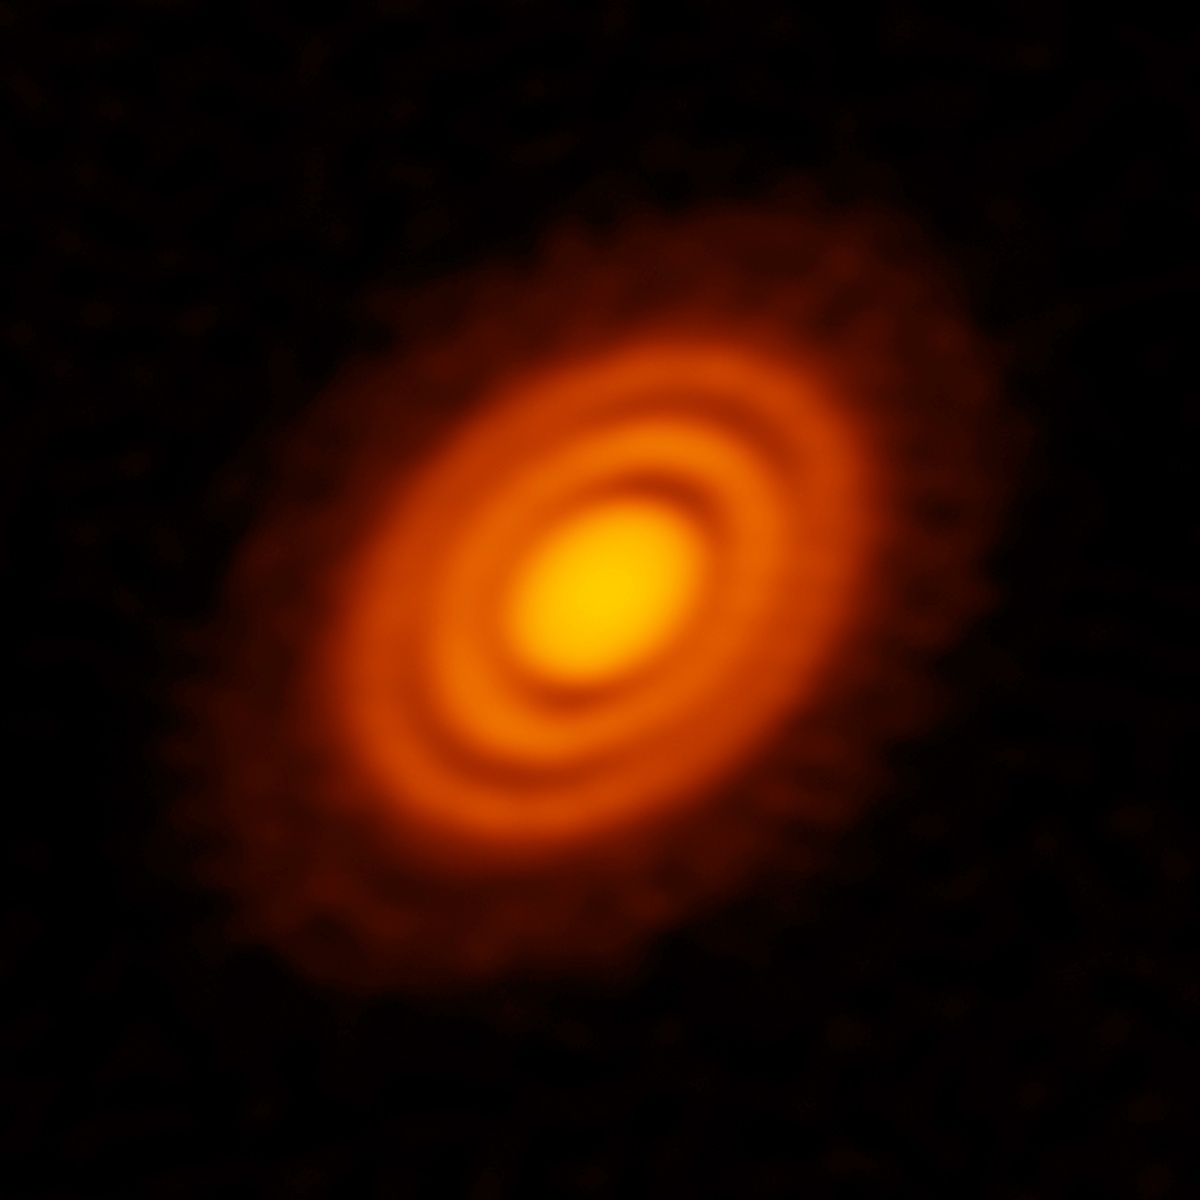 carbon monoxide in protoplanetary disk